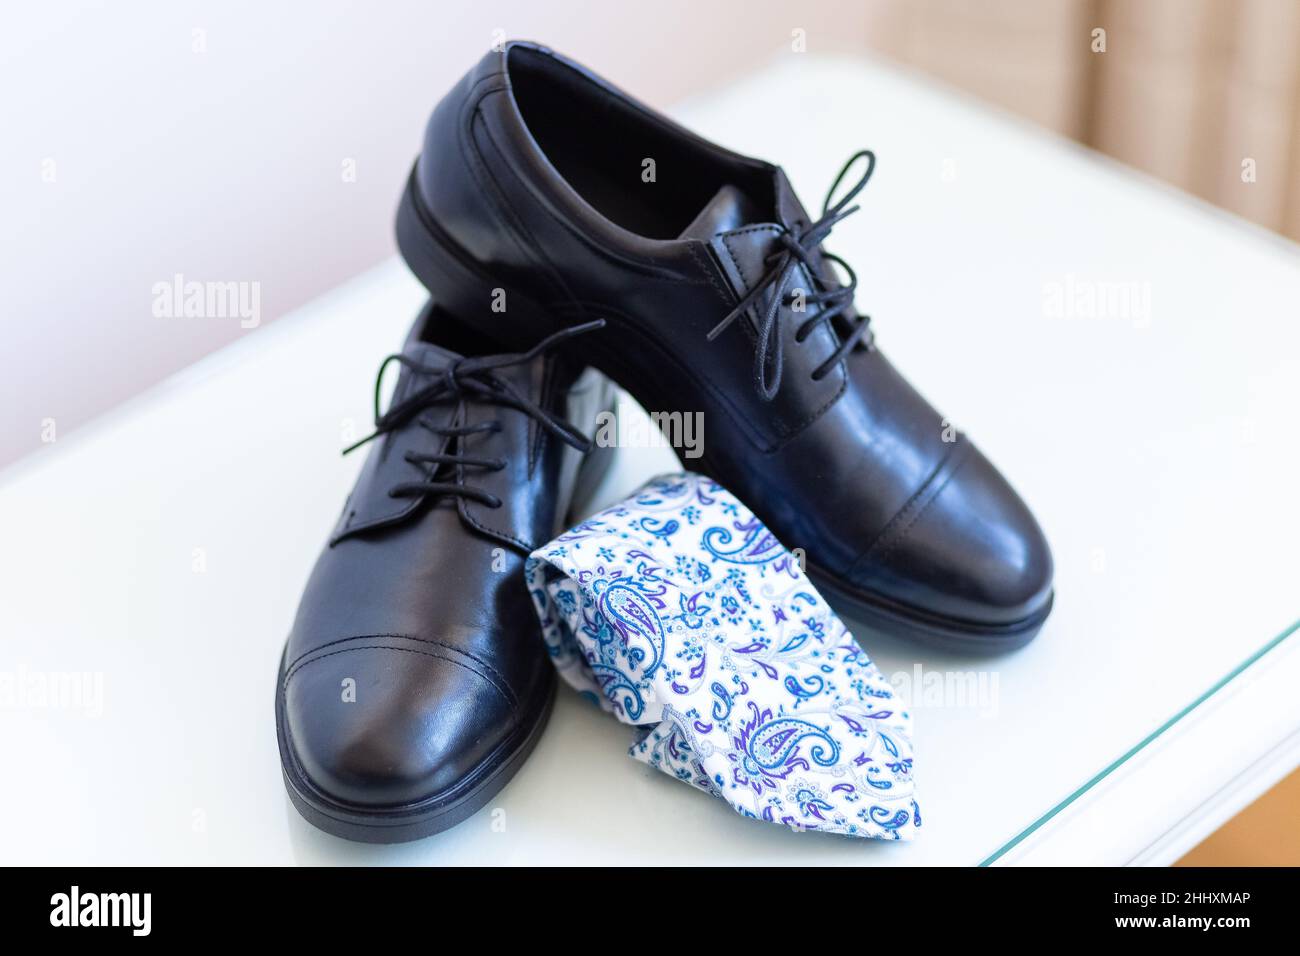 Some classic leather shoes and a tie prepared for the wedding Stock Photo